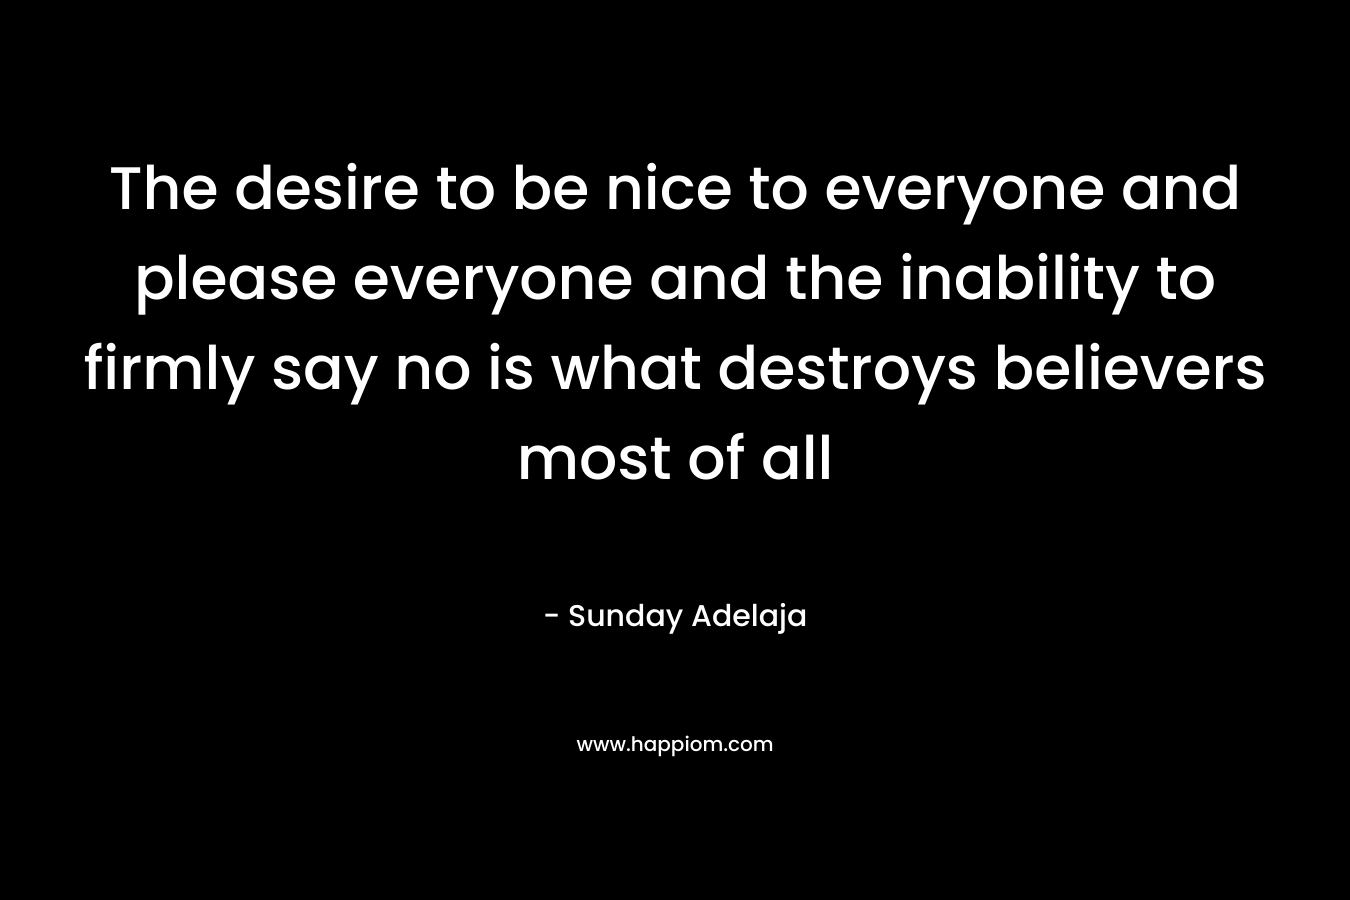 The desire to be nice to everyone and please everyone and the inability to firmly say no is what destroys believers most of all